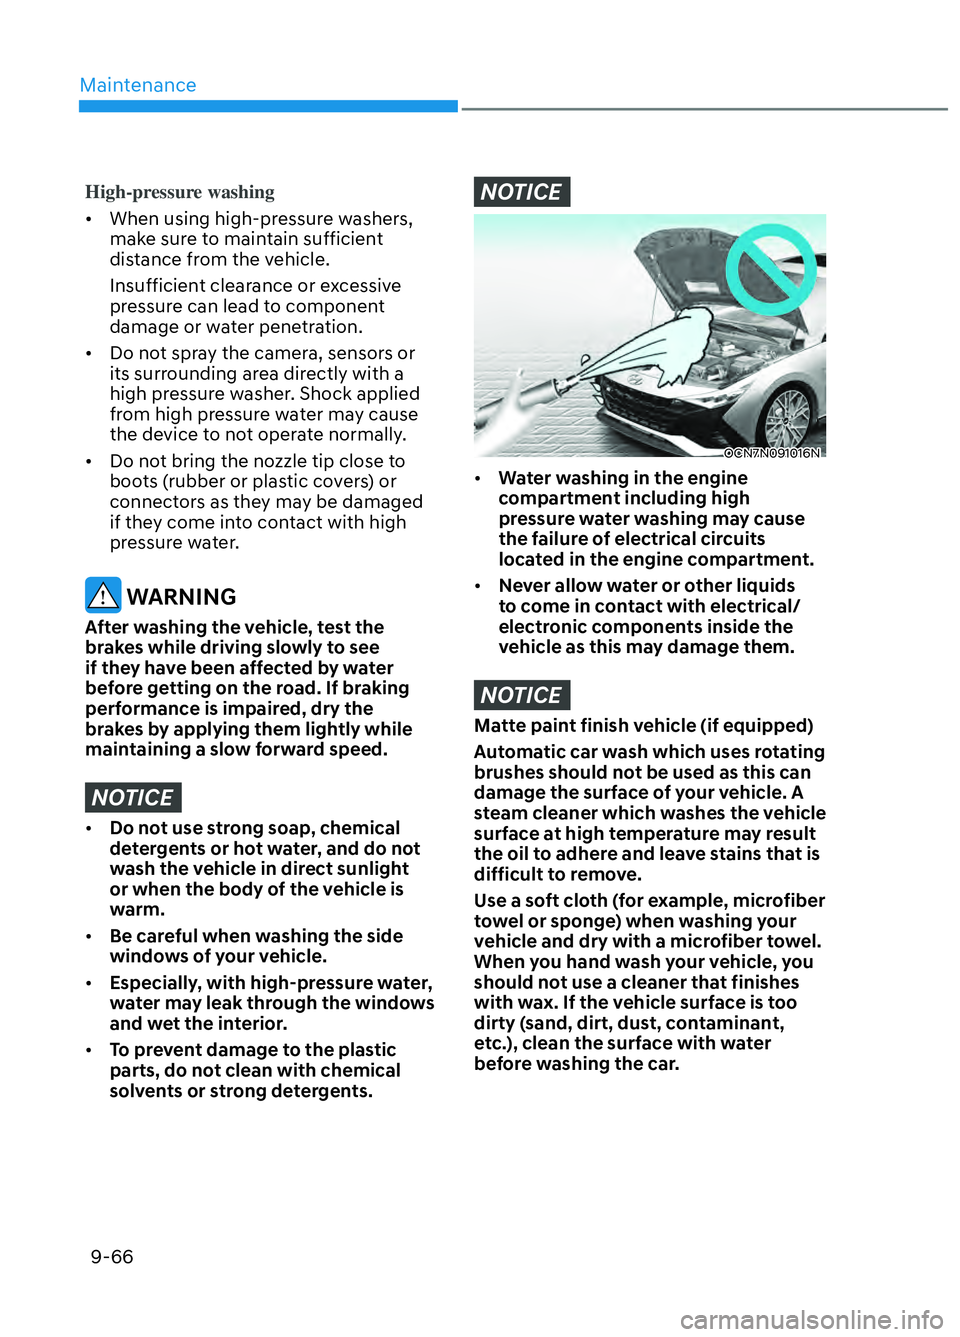 HYUNDAI ELANTRA N 2022  Owners Manual Maintenance9-66
High-pressure washing
•  When using high-pressure washers,  mak
 e sure to maintain sufficient 
distance from the vehicle.
Insufficient clearance or excessive 
pressure can lead to c